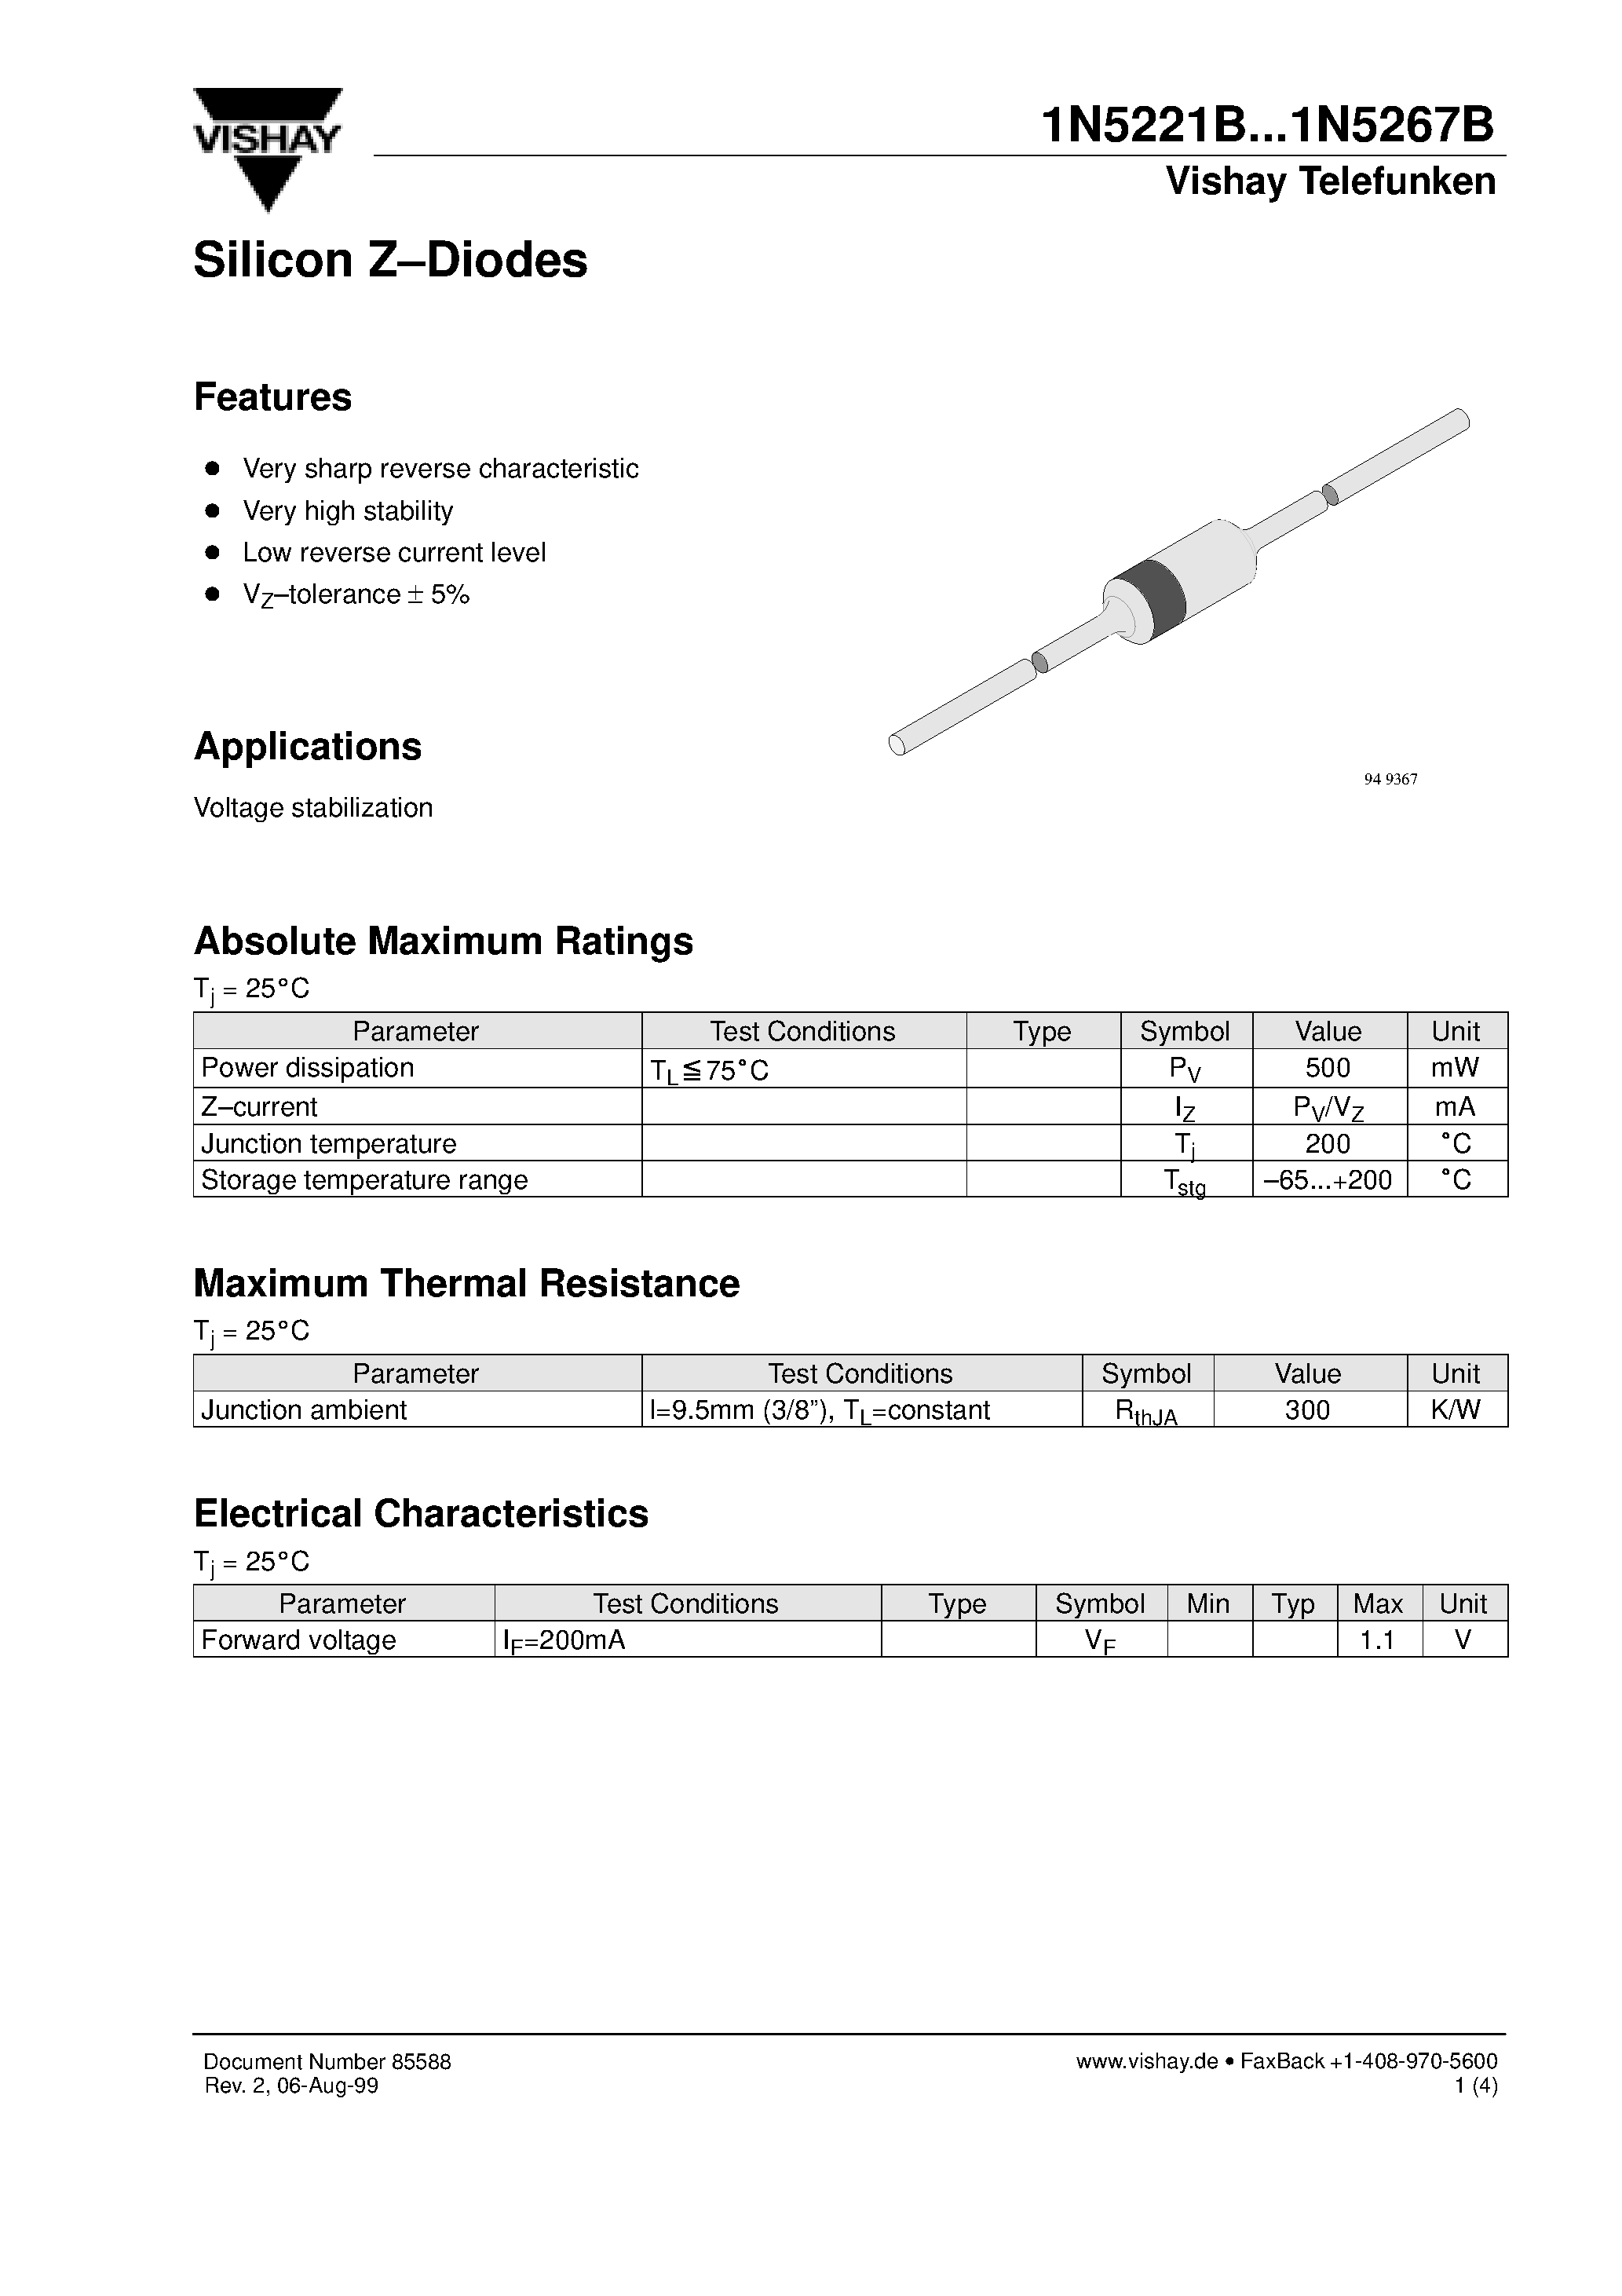 Datasheet 1N5263B - Silicon Z-Diodes page 1